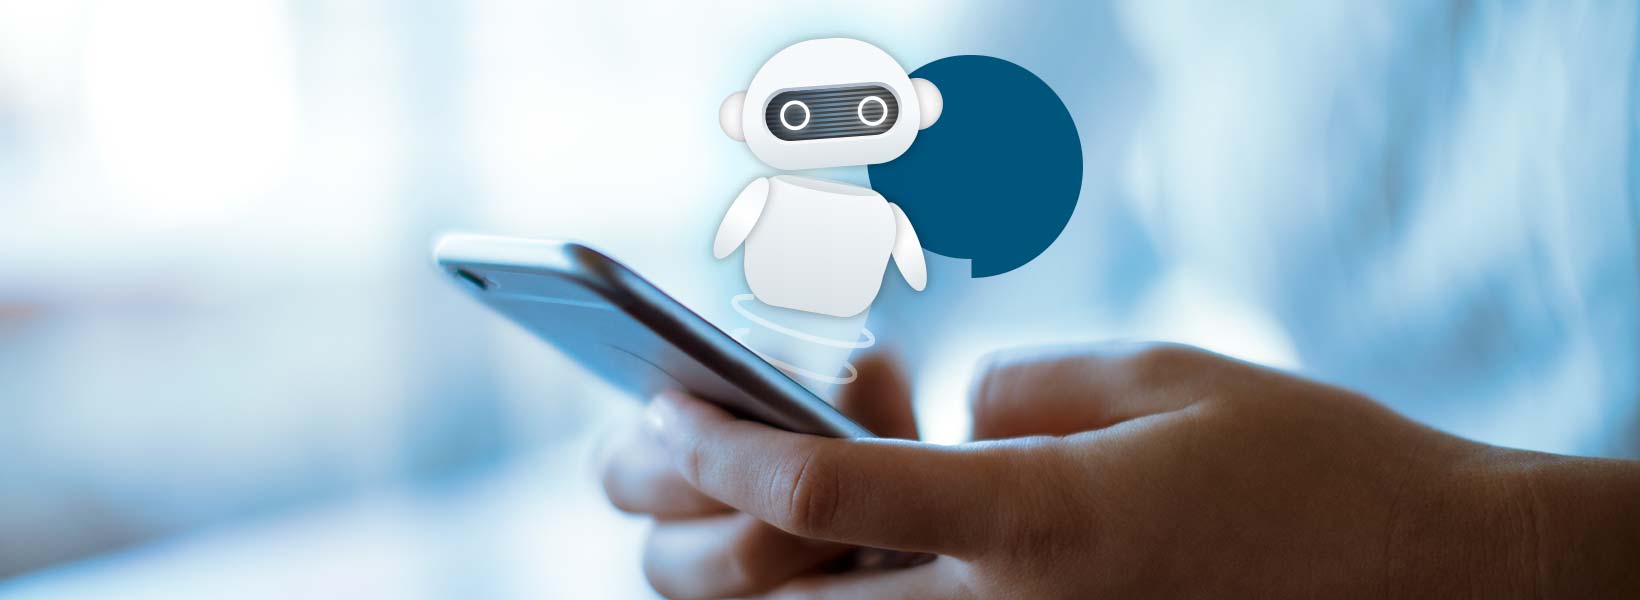 6 Top Chatbot Examples: AI Customer Service Bots in Action